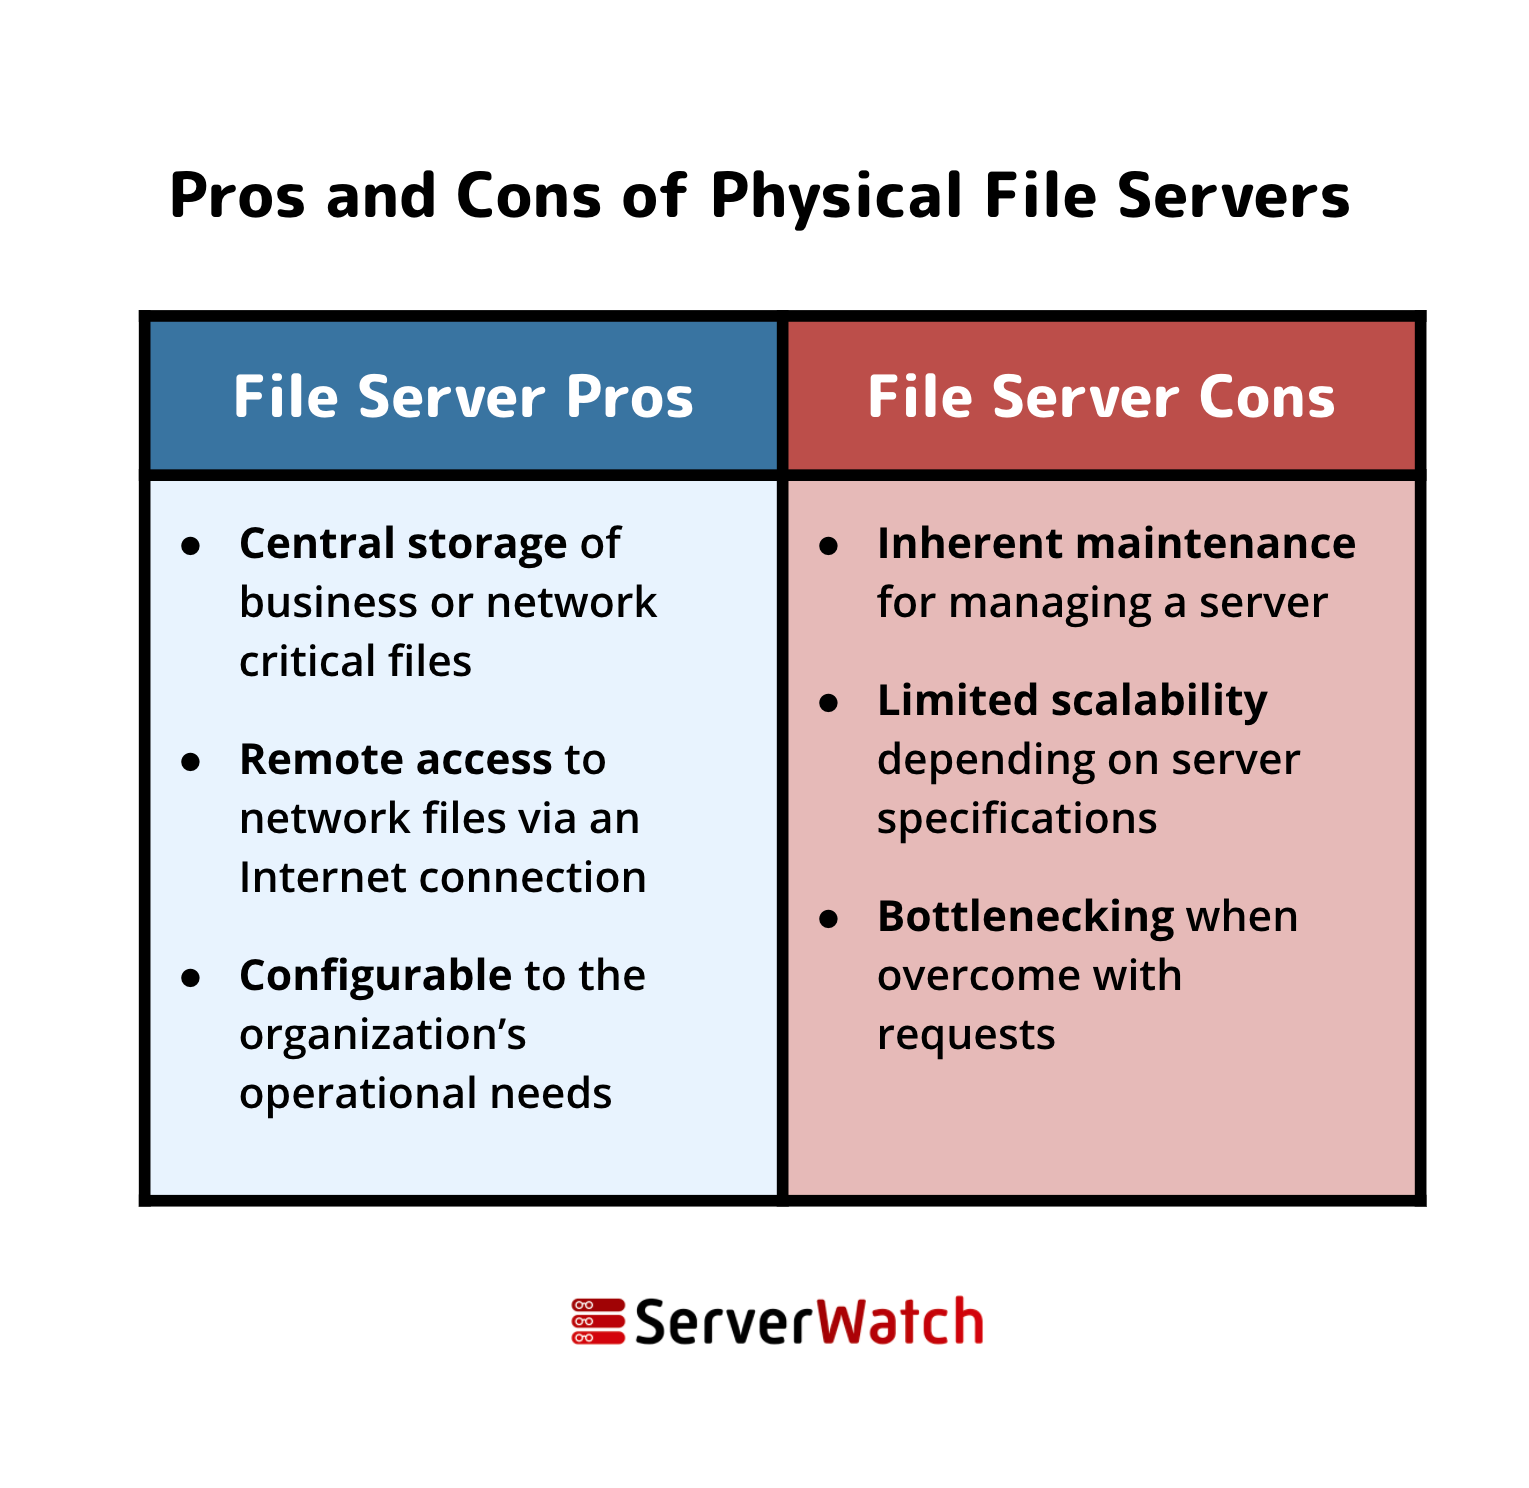 A graphic showing the pros and cons of a physical file server. Designed by Sam Ingalls.